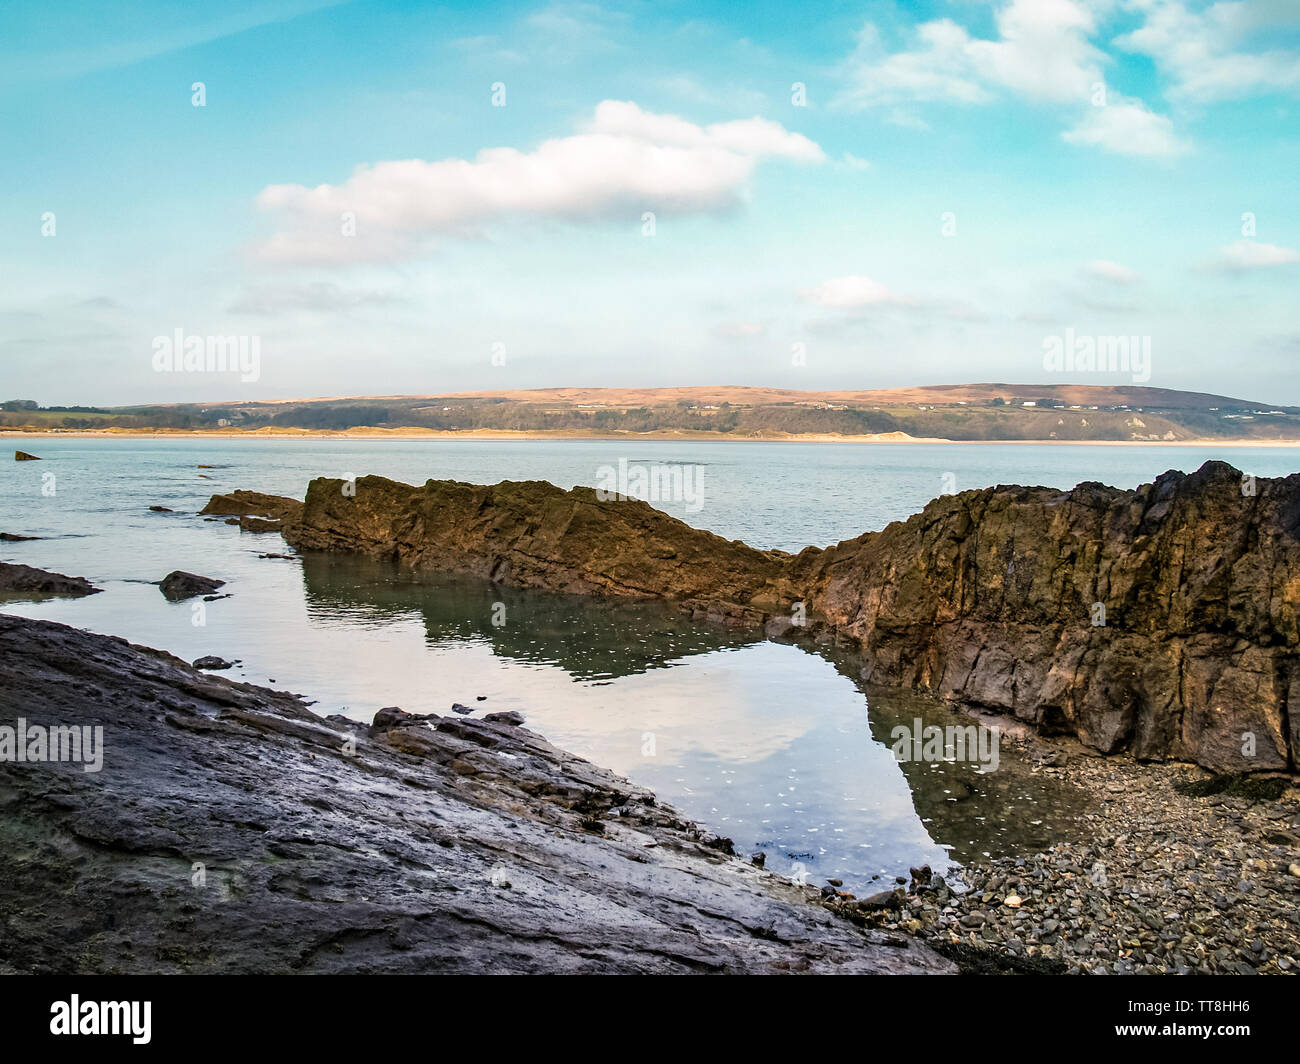 A view from just below Oxwich Wood, looking out over the sea towards Oxwich Bay, Gower, Wales, UK. Stock Photo